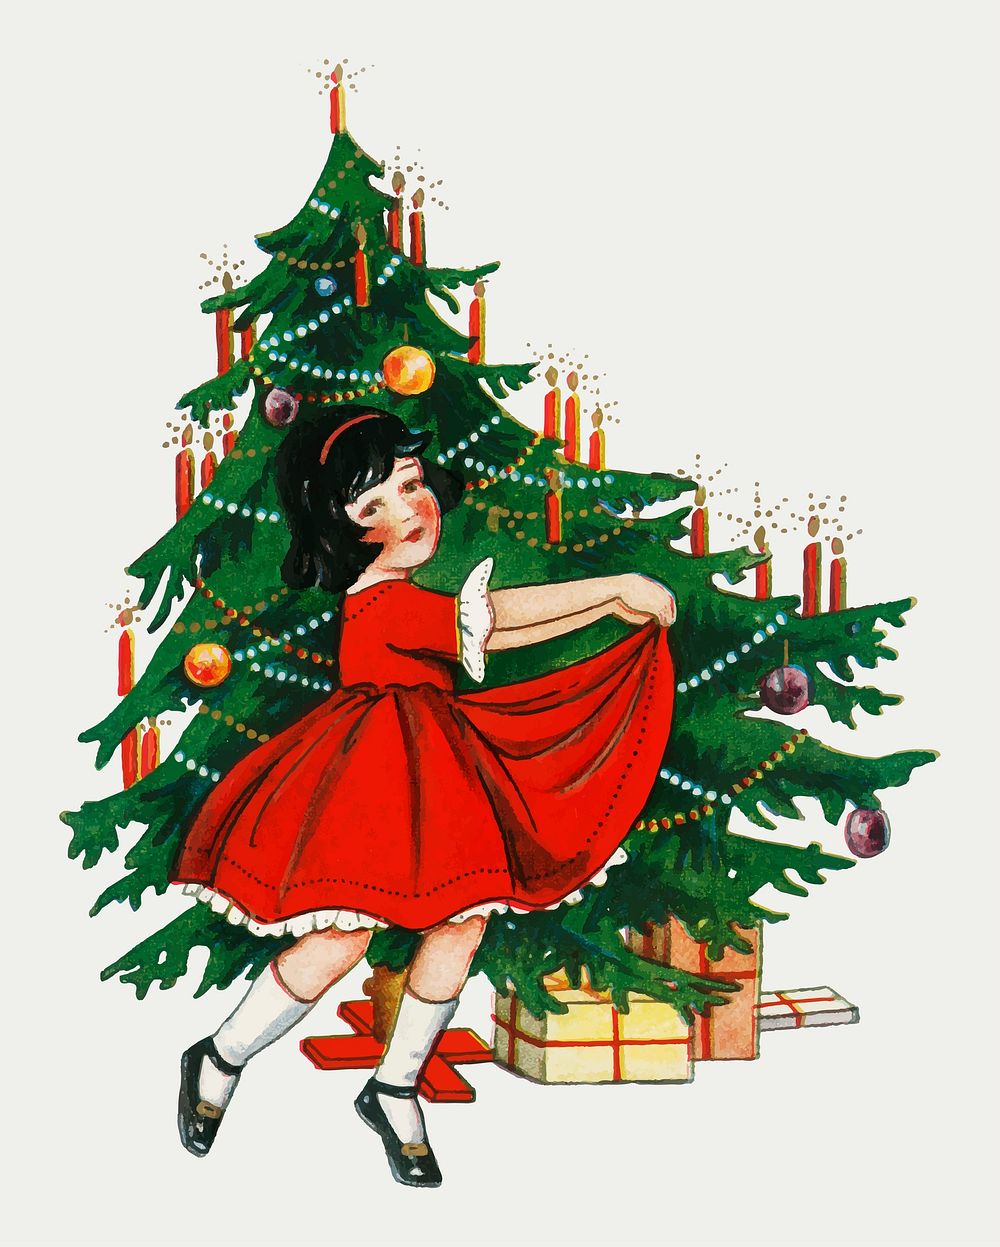 Little girl dancing next to a Christmas tree with gift boxes underneath vector